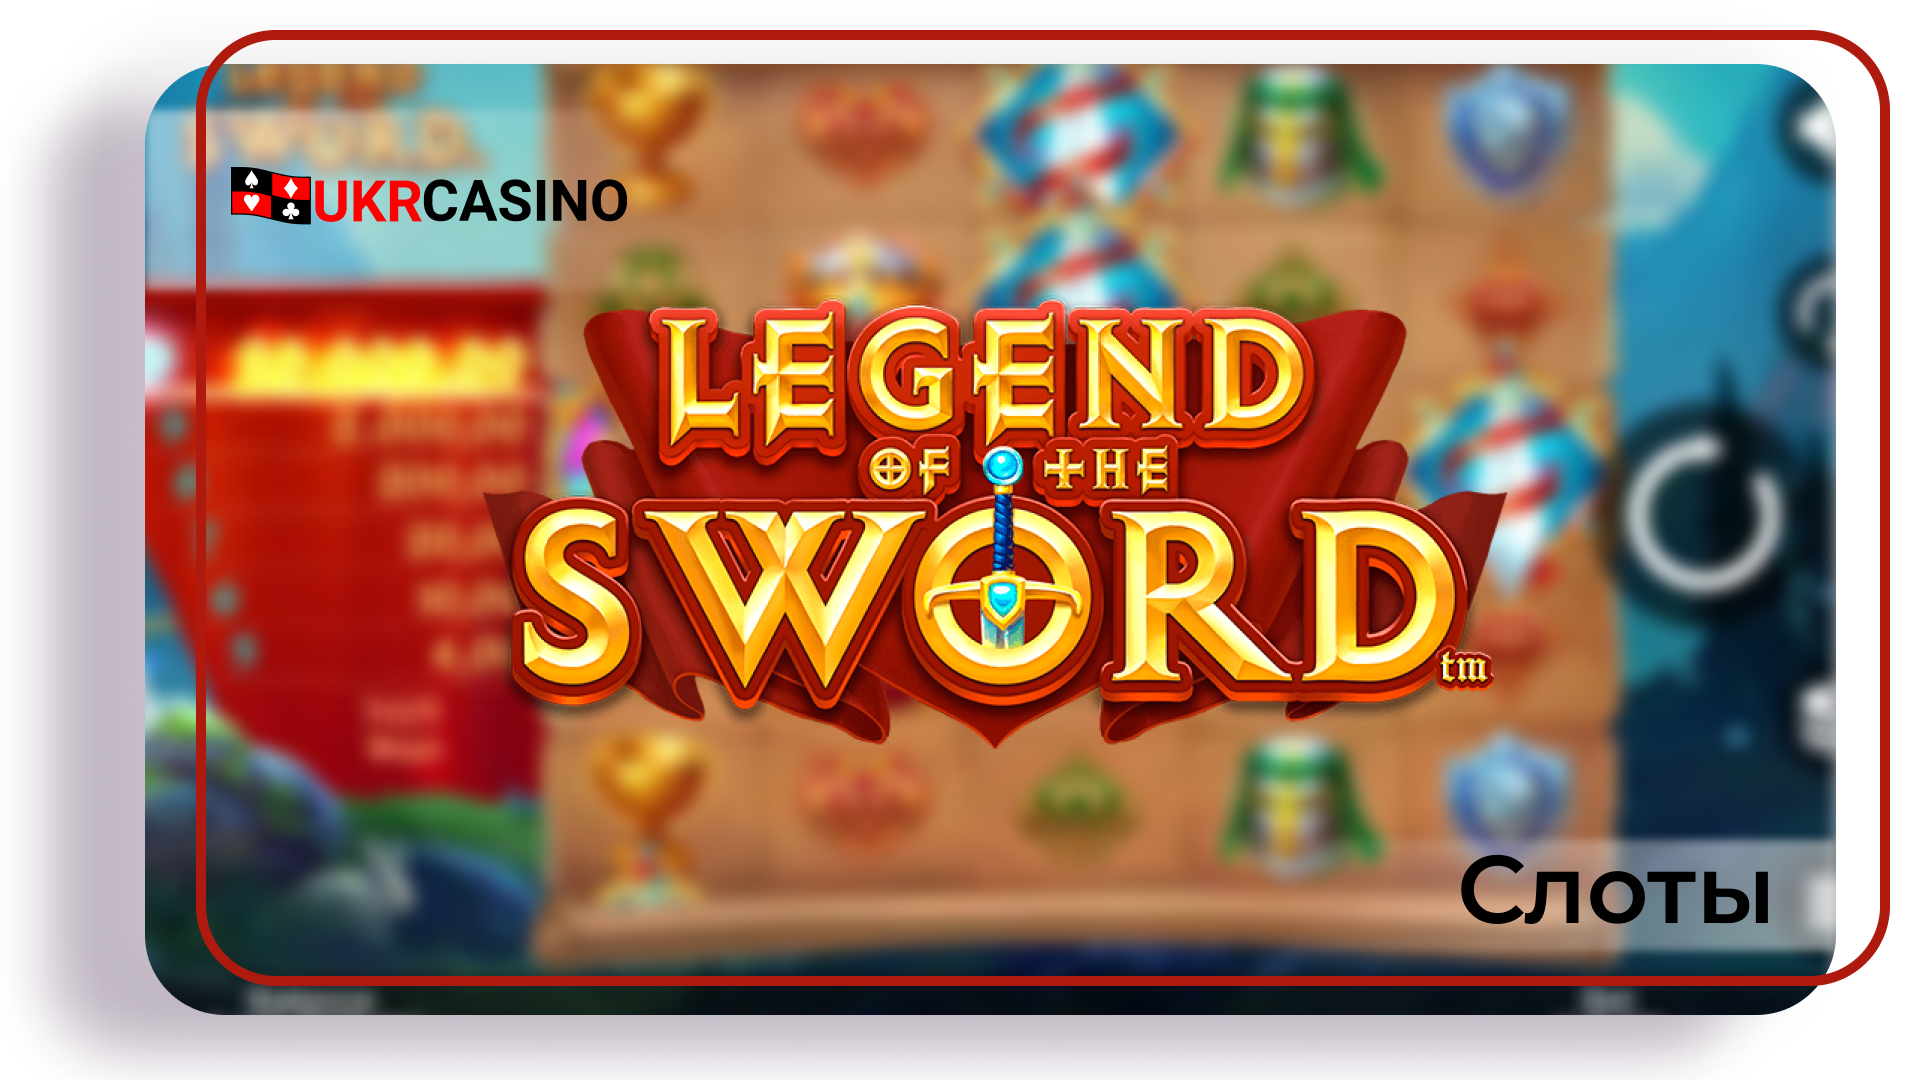 Legend of the Sword - Microgaming